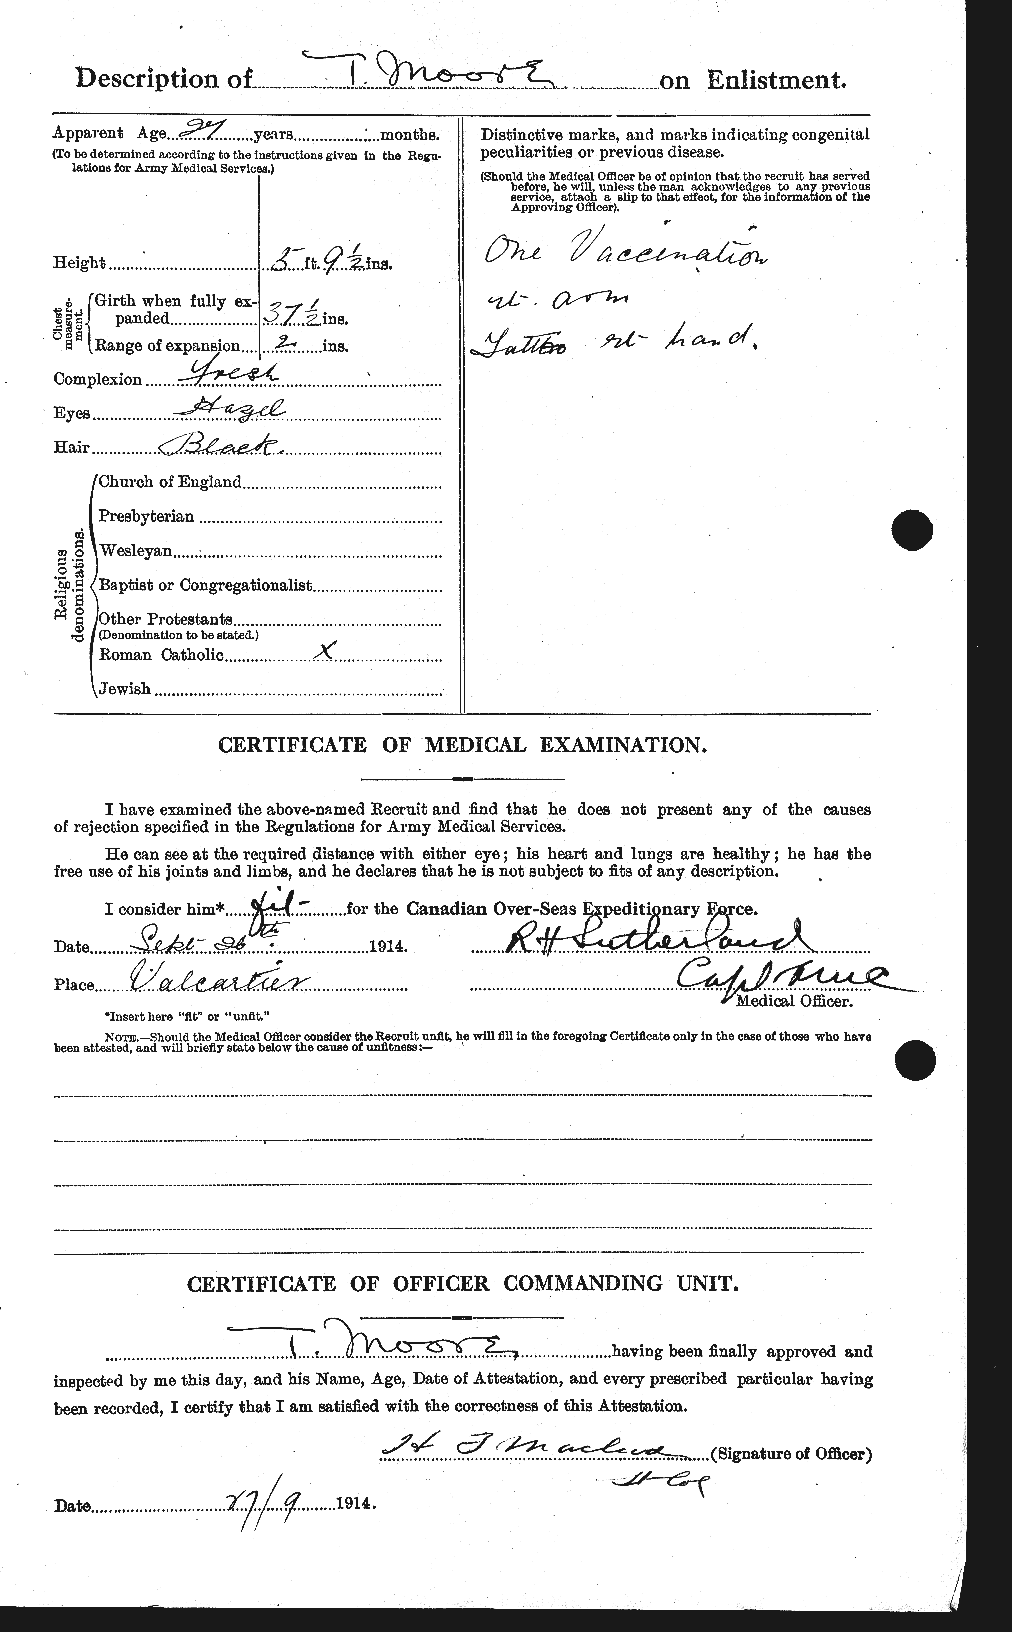 Personnel Records of the First World War - CEF 505620b